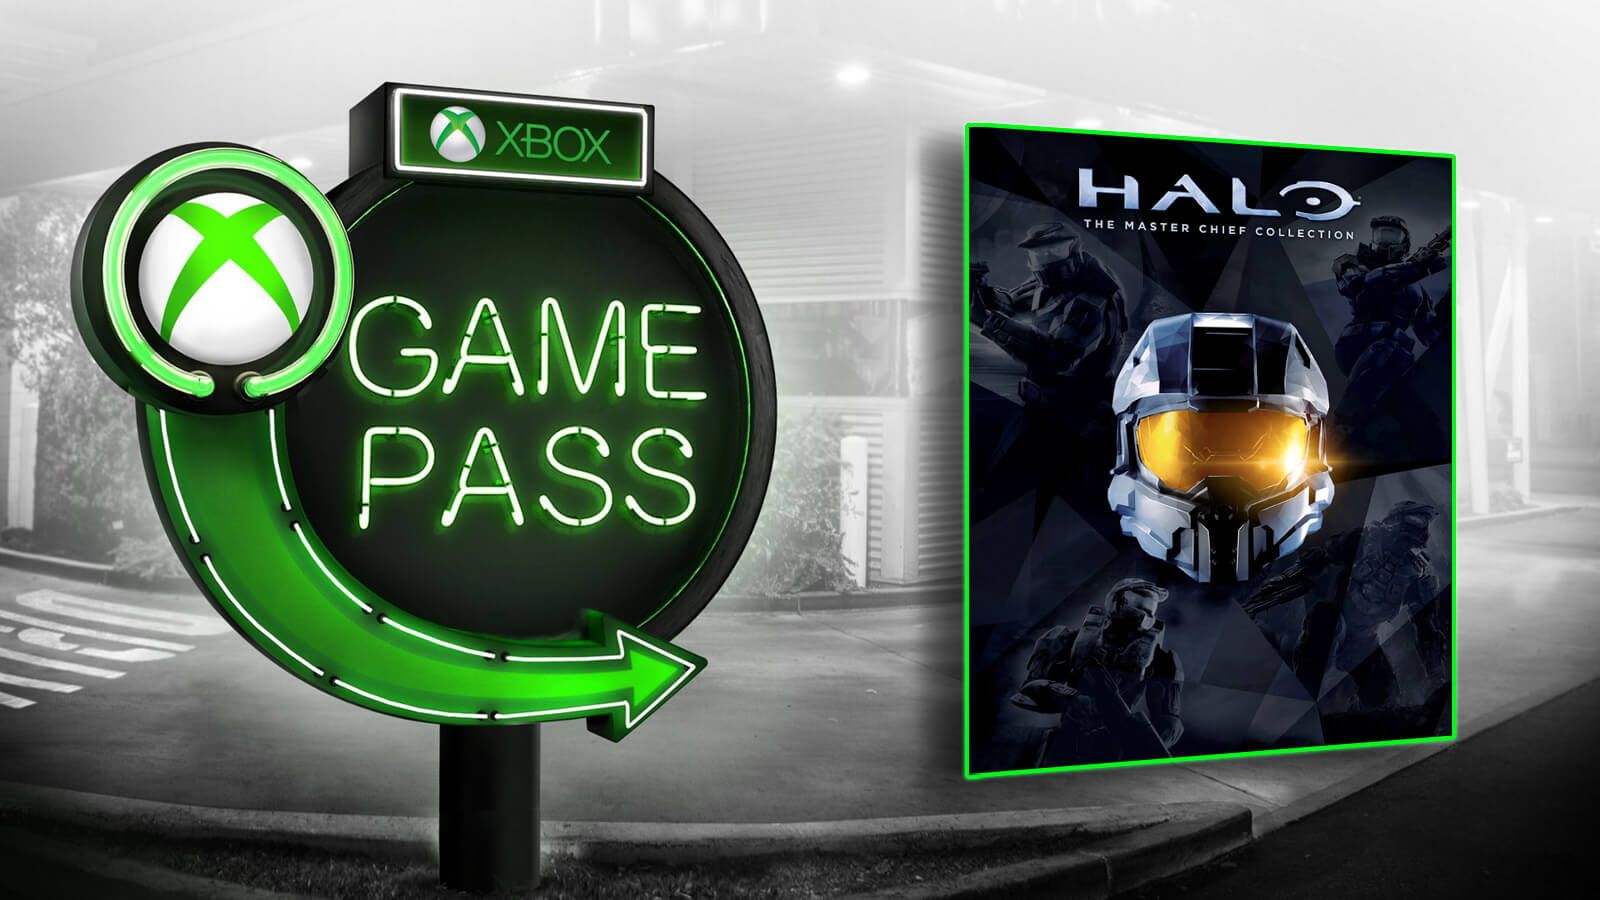 Microsoft's Xbox Game Pass promotional image.